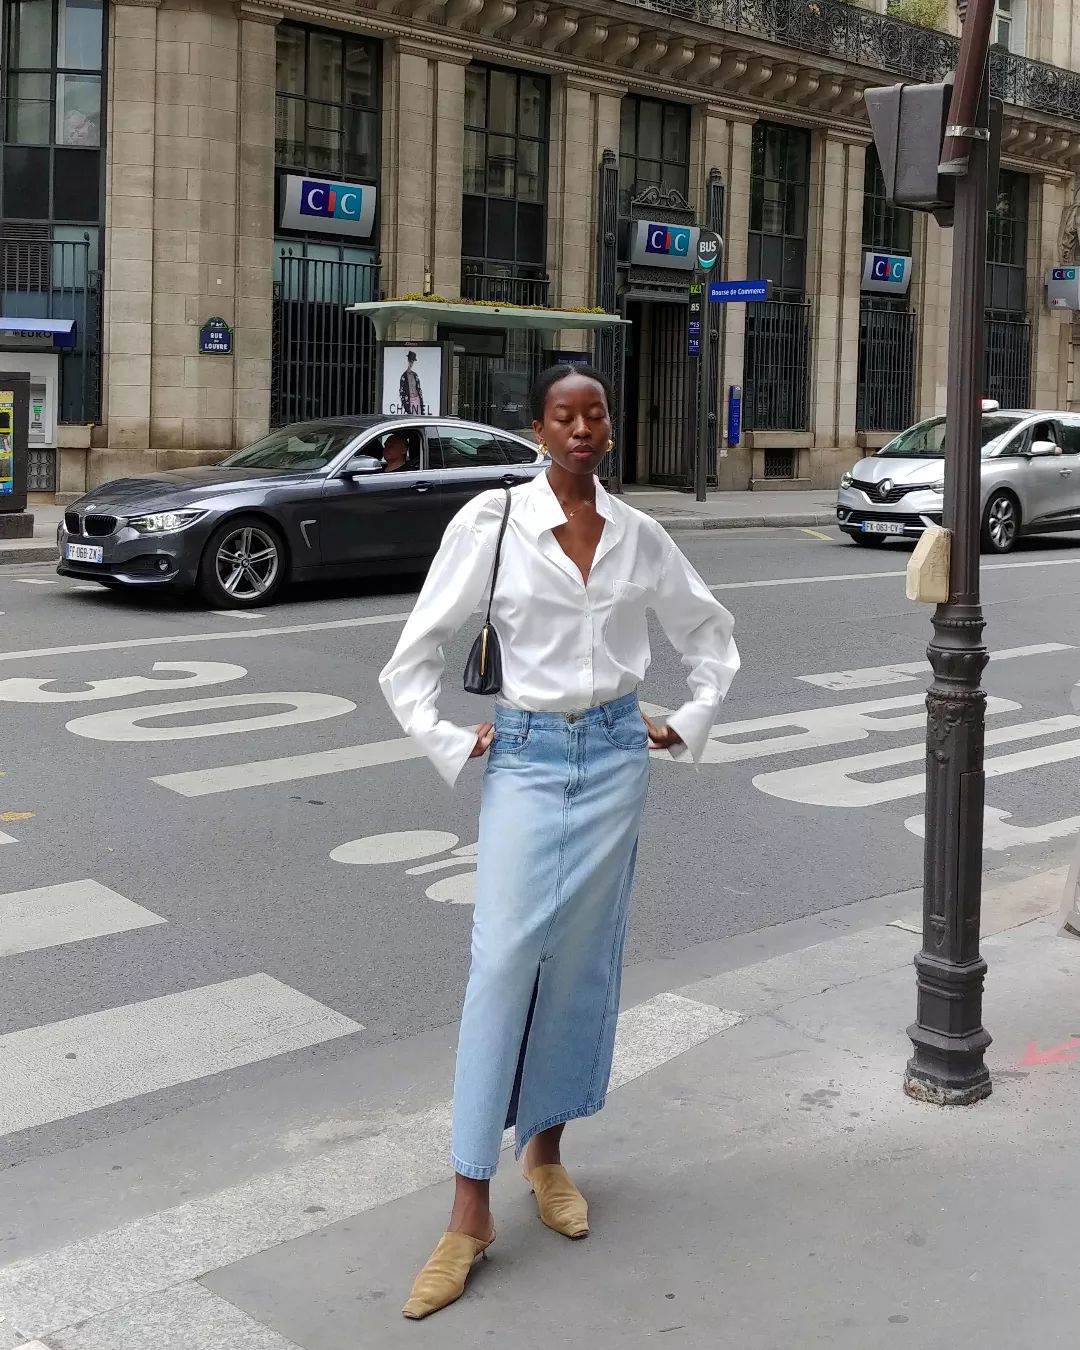 10 Long Jean Skirt Outfits That Prove You Need a Denim Maxi ASAP